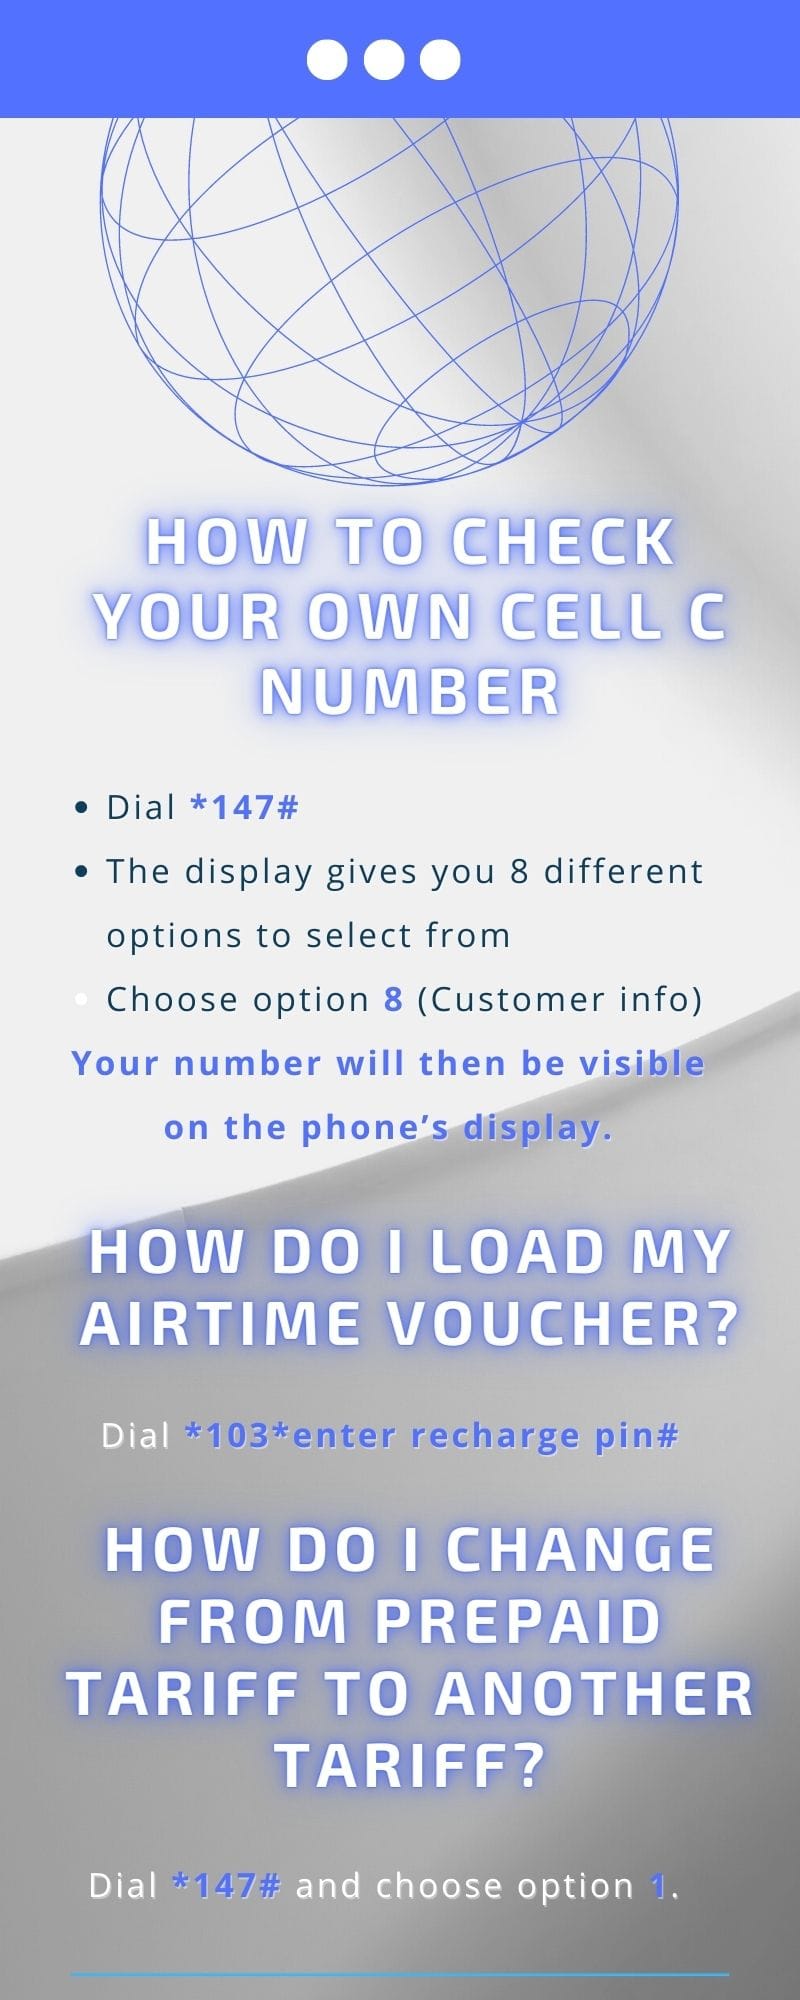 How to check your own Cell C number